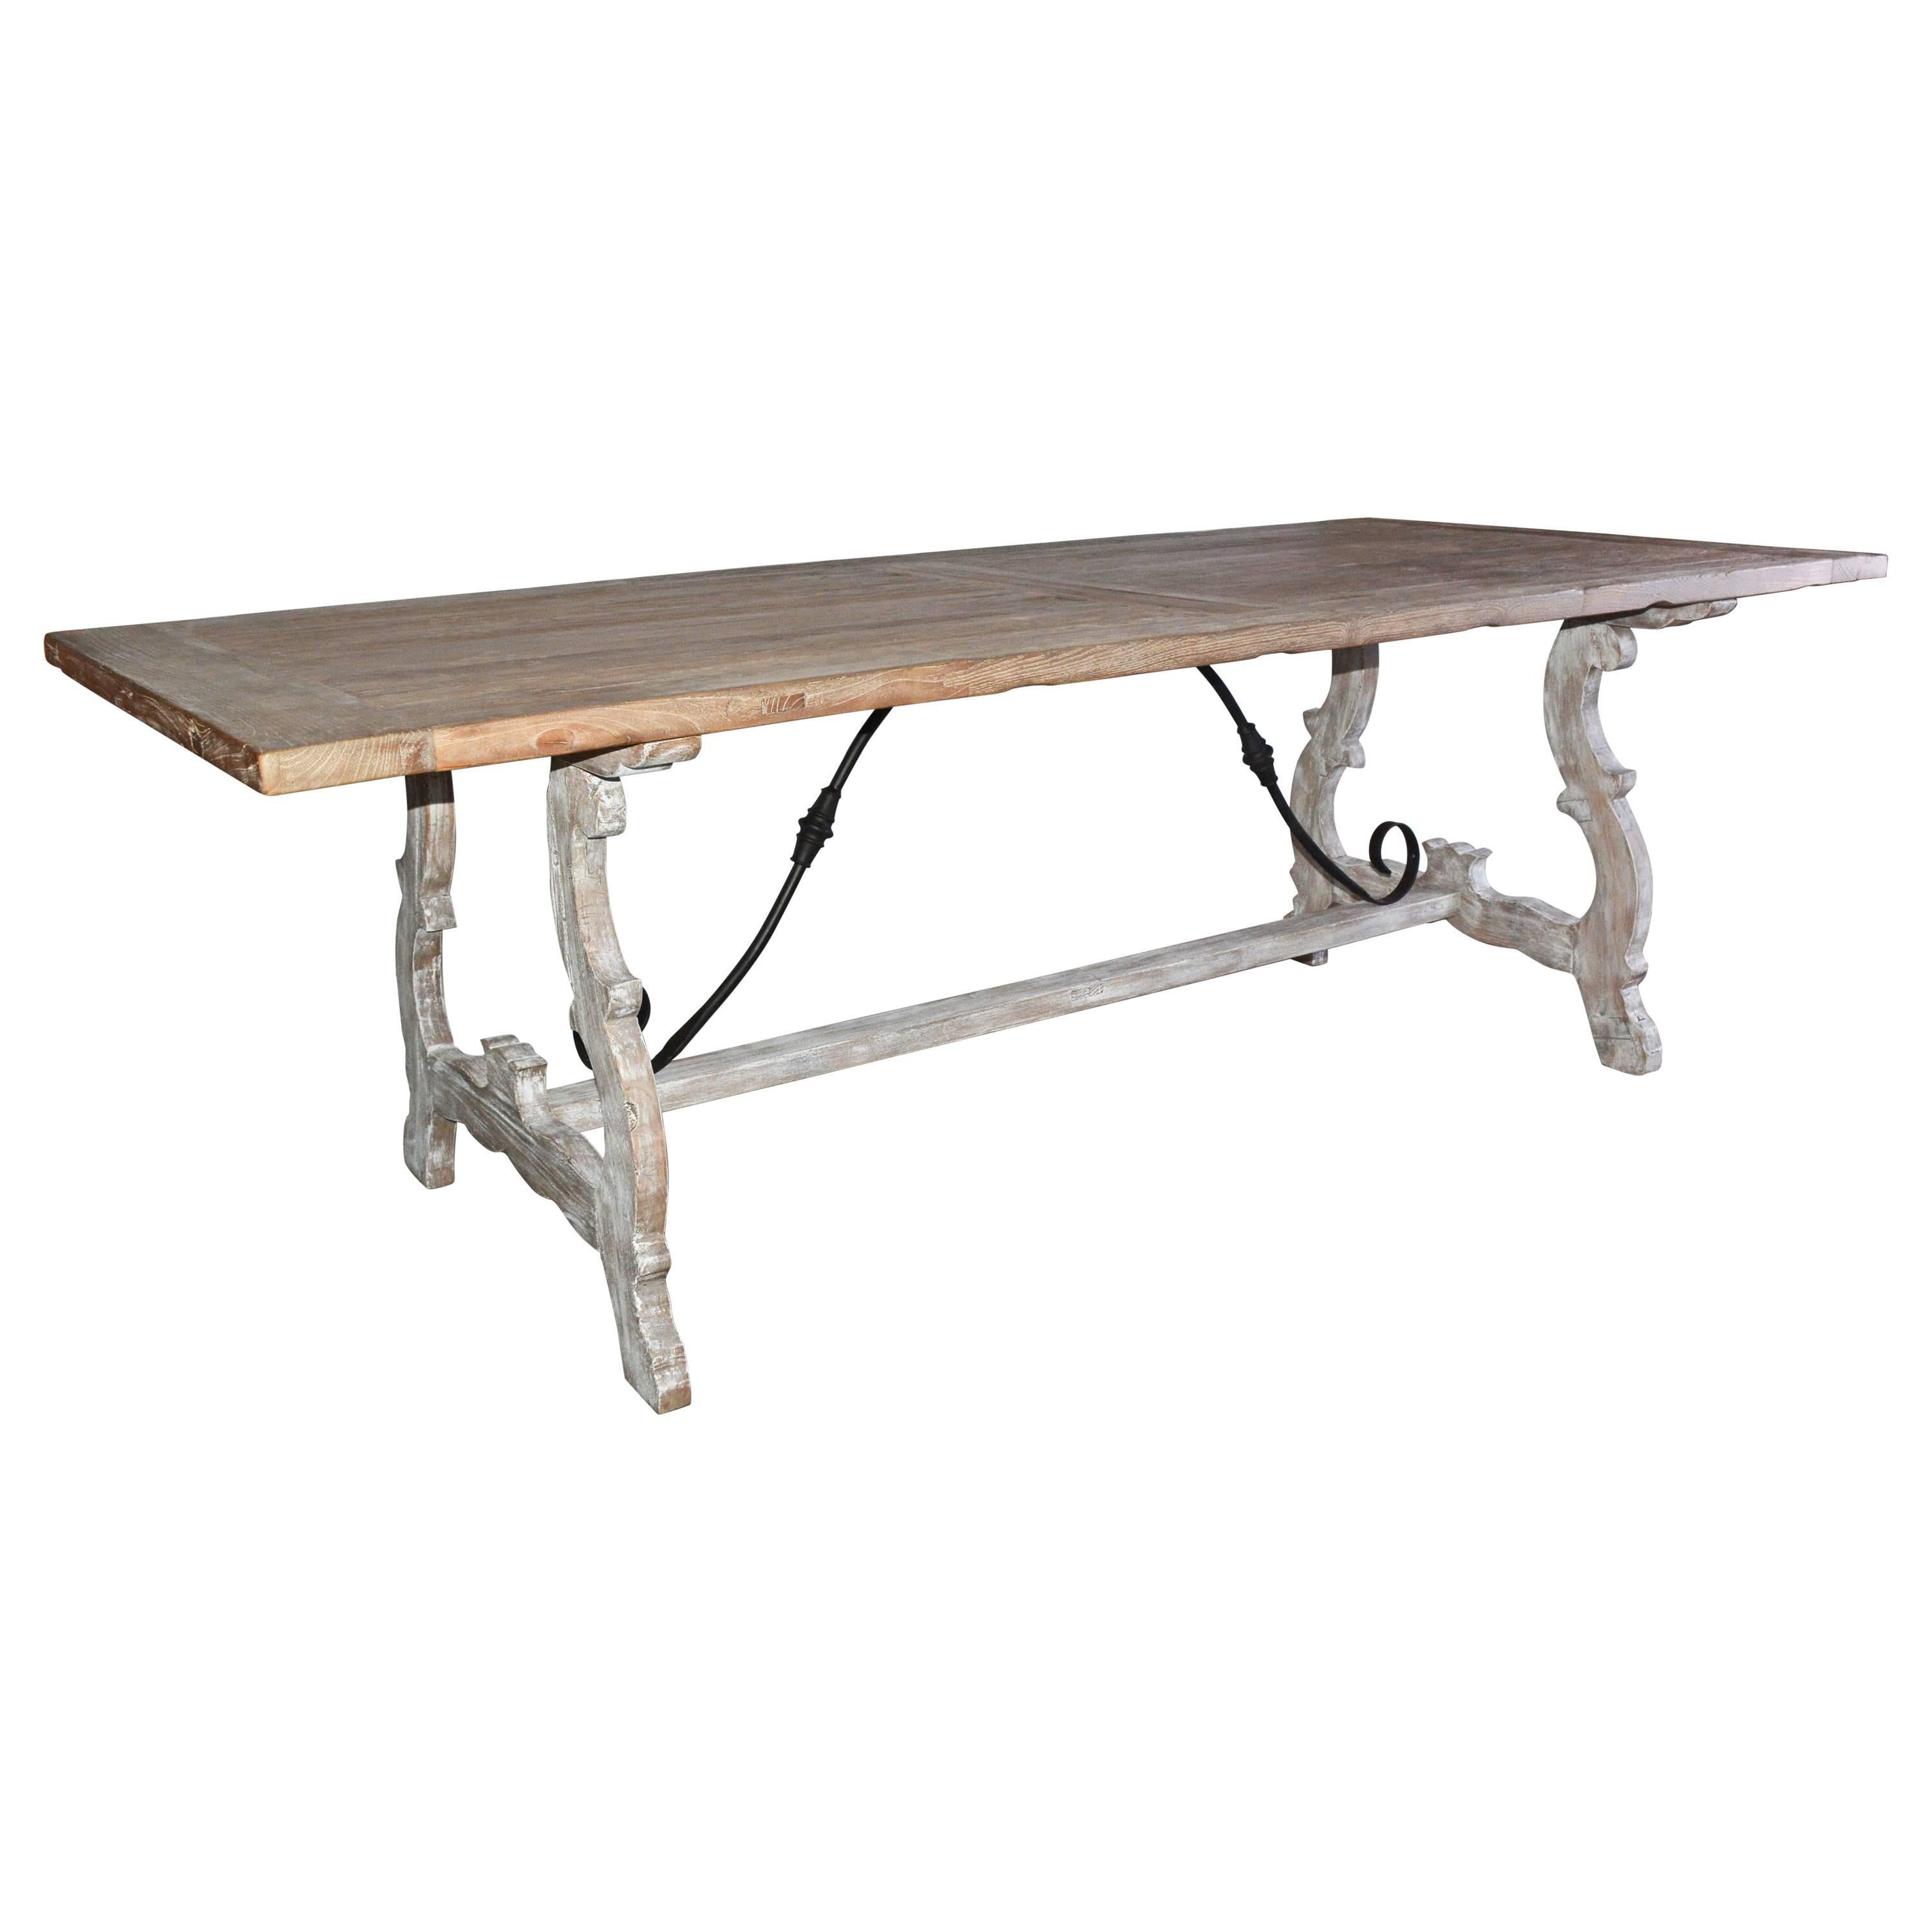 Spanish Renaissance Style Country Dining Table